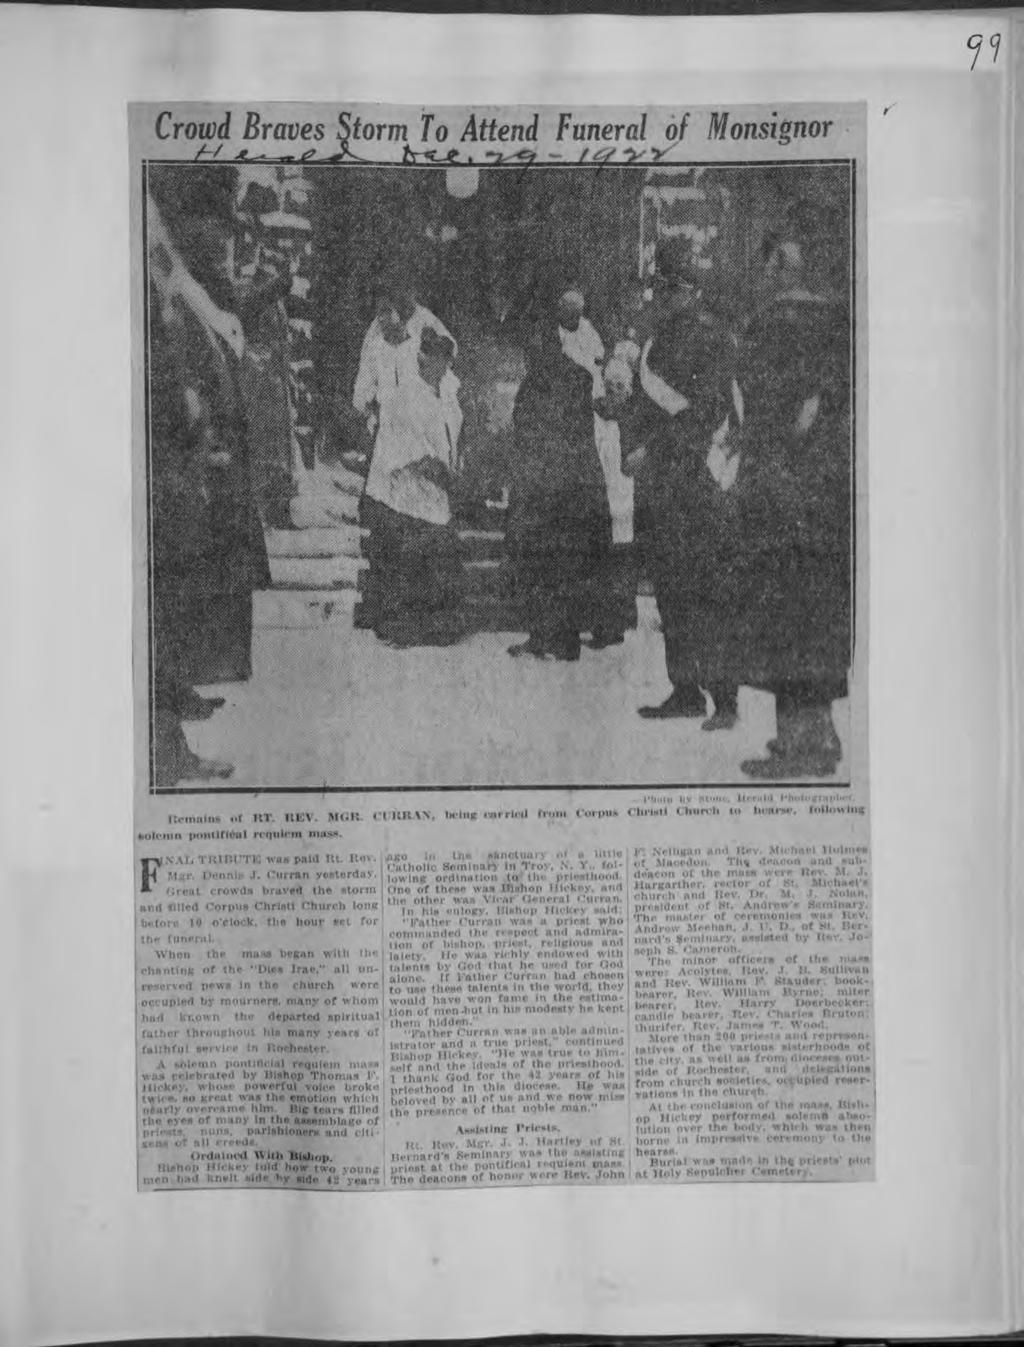 Central Lbrary of Rochester and Monroe County Hstorc Scrapbooks Collecton l Crowd Braves Storm to Attend Funeral of Monsgnor Remans <>r RT REV MGR < k: \\ beng carred o Corpus PllUlO < n -H < nn to h